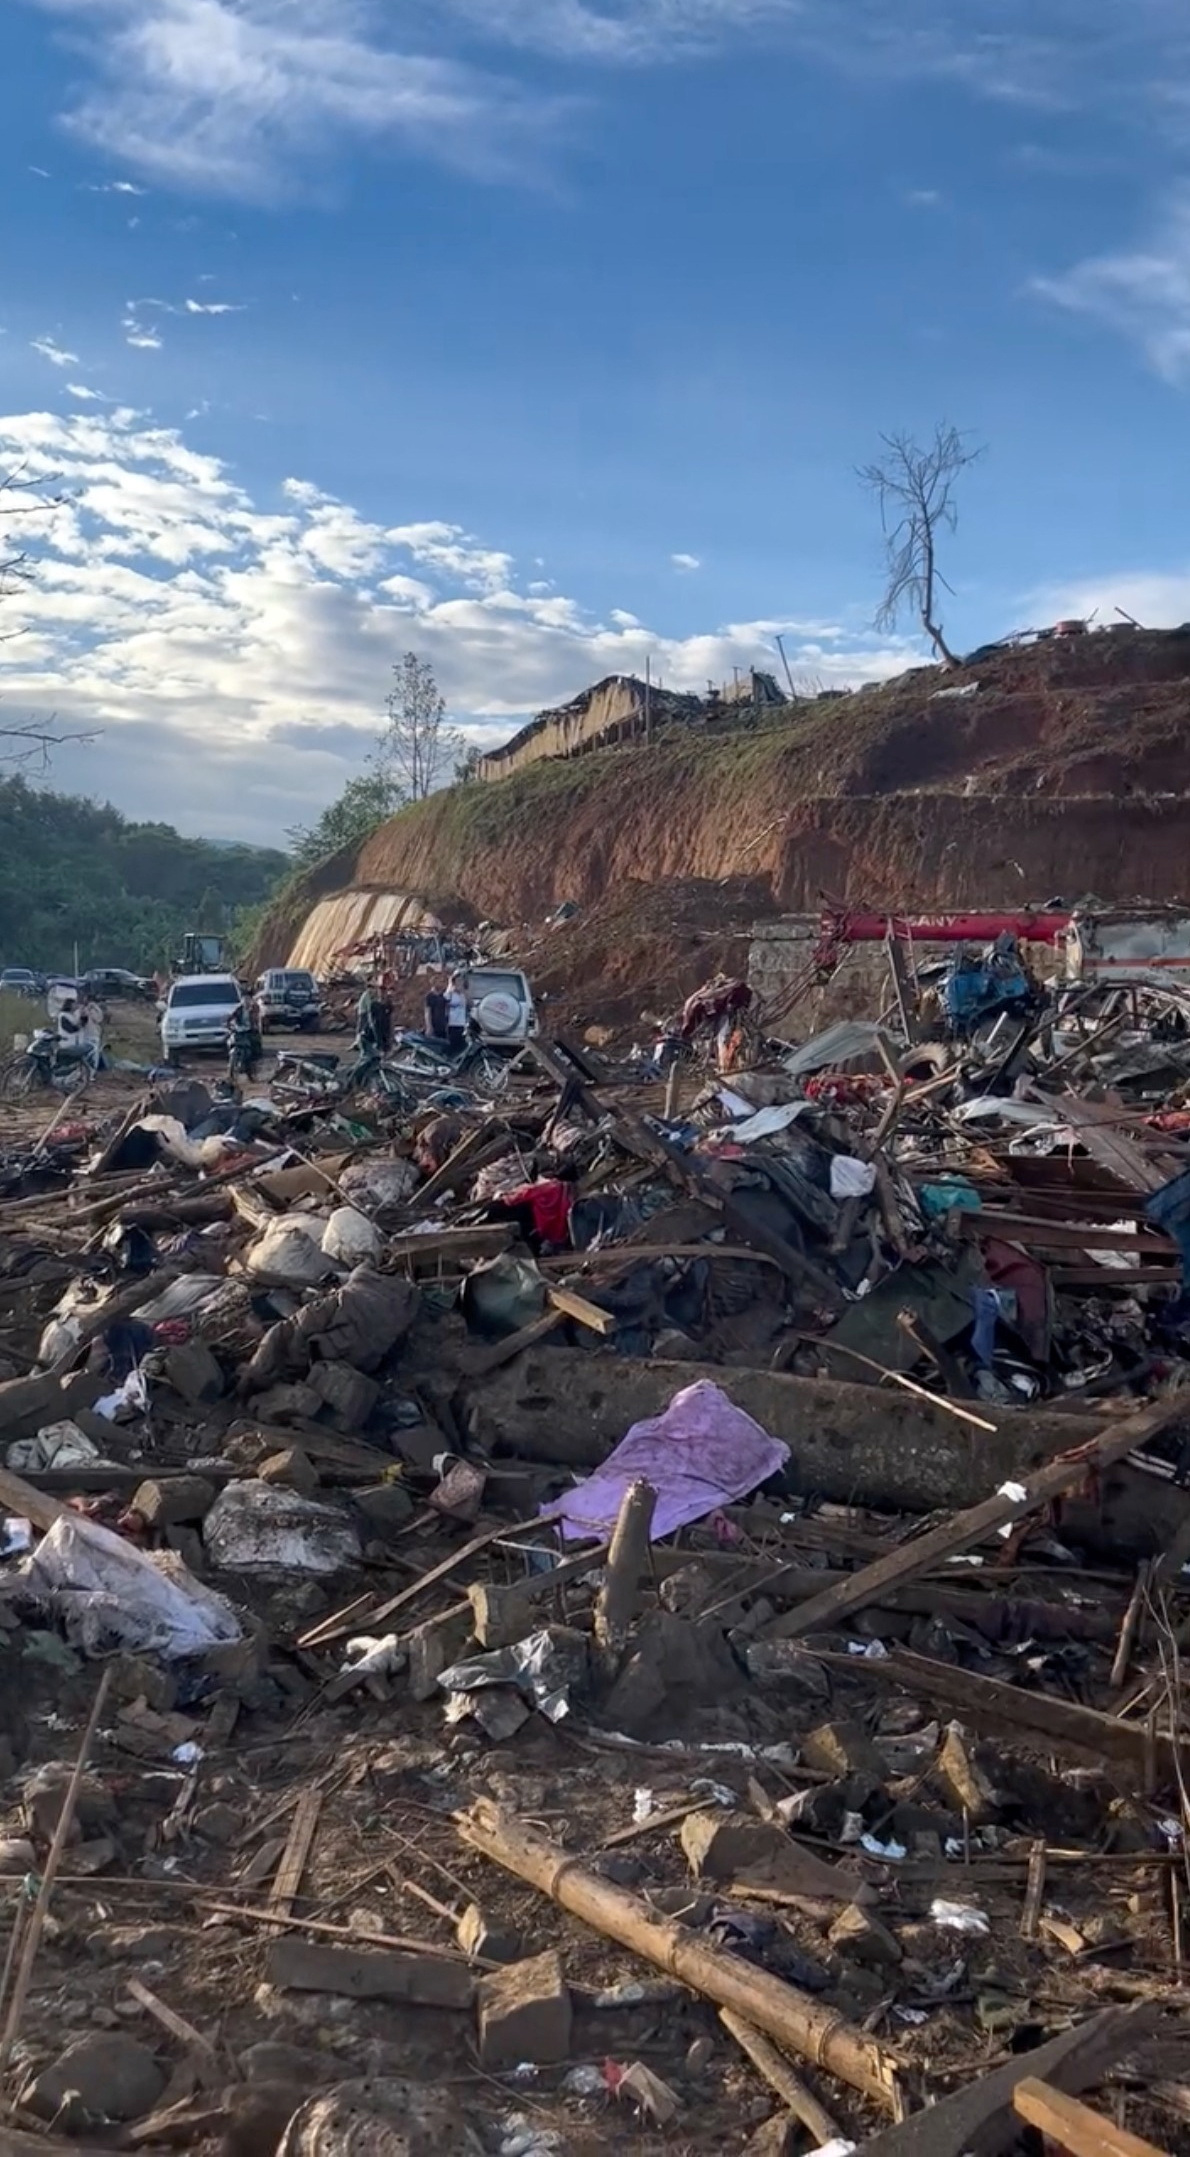 Debris in a refugee camp after women and children were killed in Myanmar